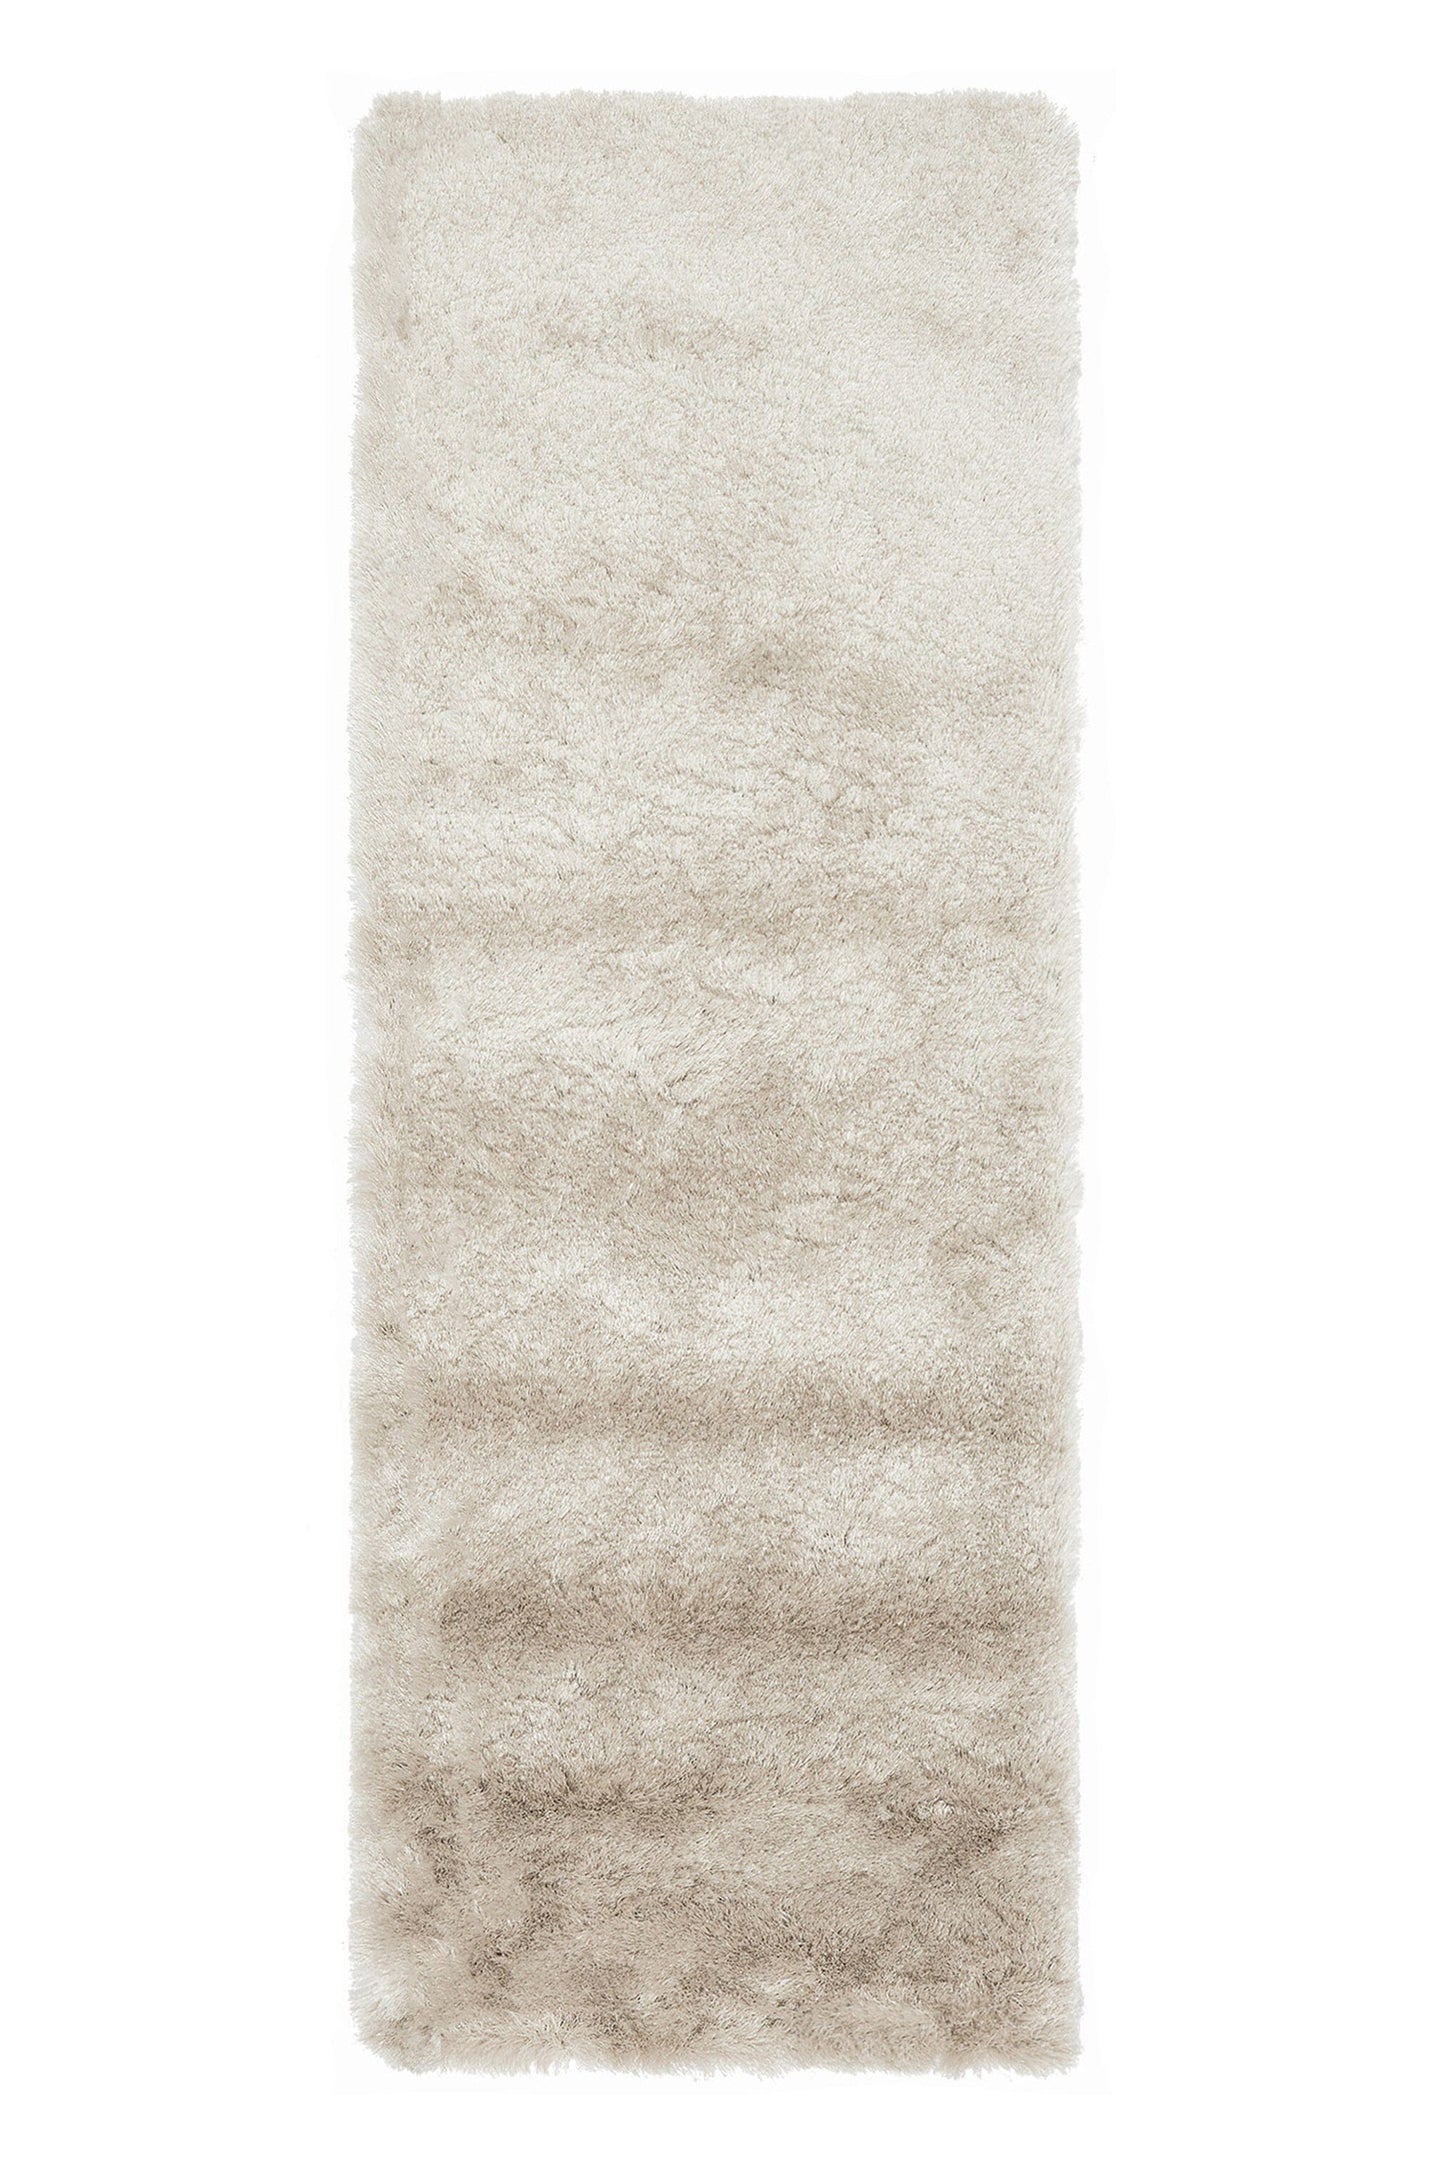 Asiatic Carpets Whisper Table Tufted Rug Champagne - 65 x 135cm